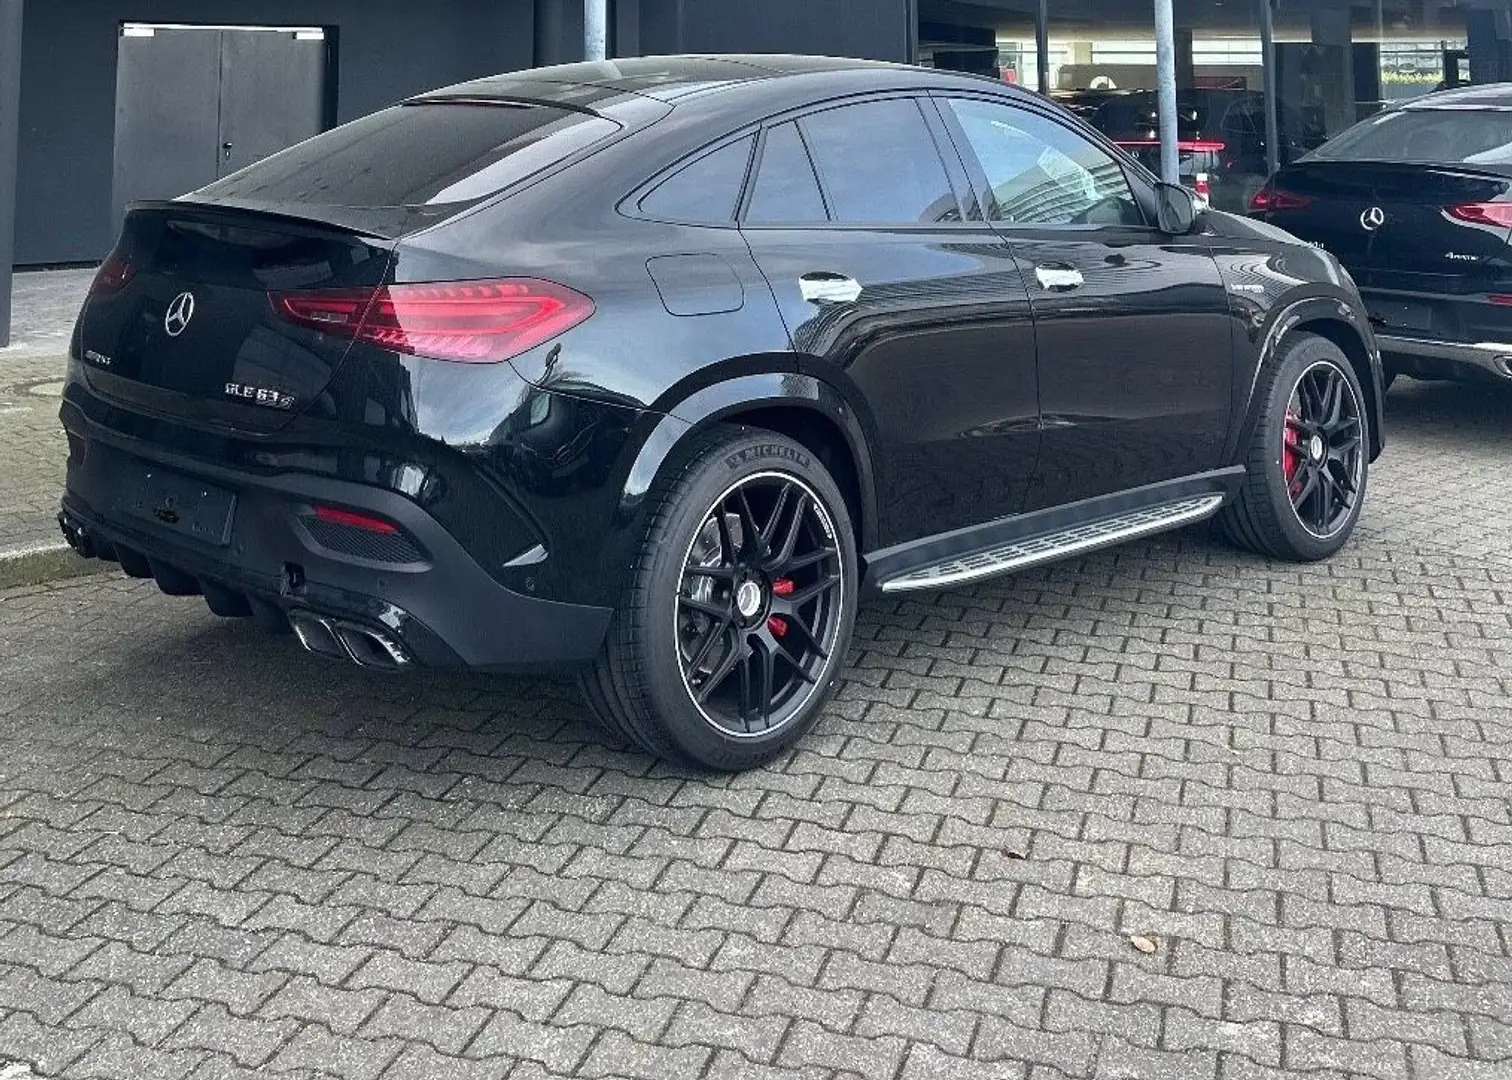 Mercedes-Benz GLE 63 AMG Mercedes-AMG GLE 63 S 4MATIC+, red leather Black - 1